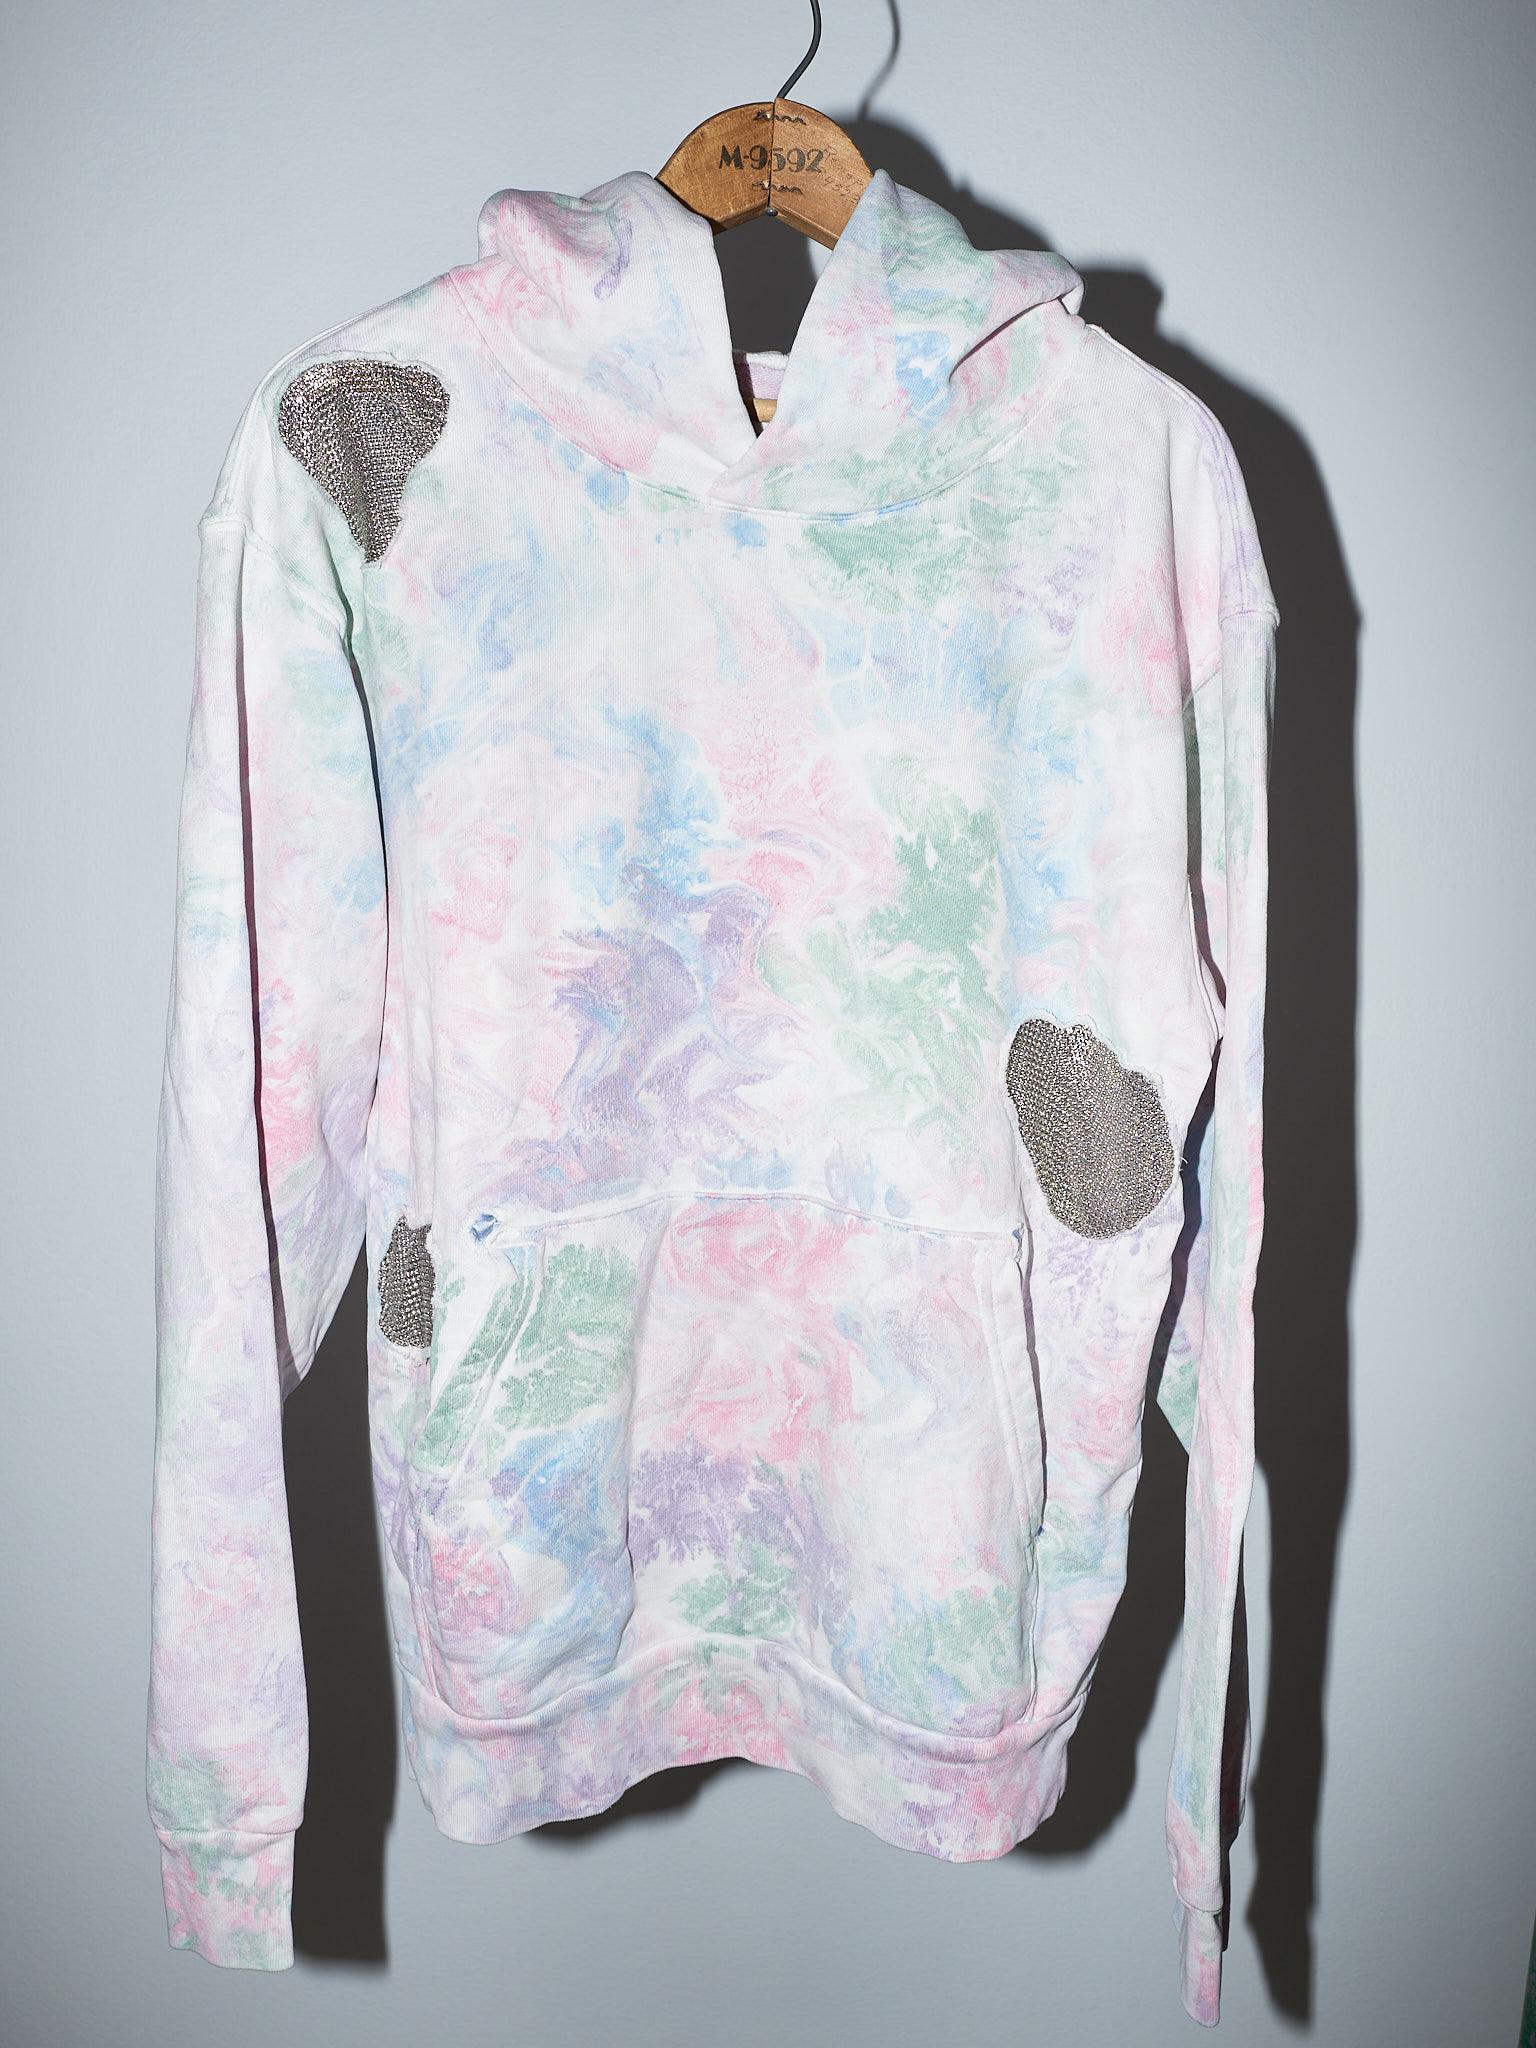 Hoodie Cotton Embellished Chain Patchwork Marble J Dauphin In New Condition For Sale In Los Angeles, CA